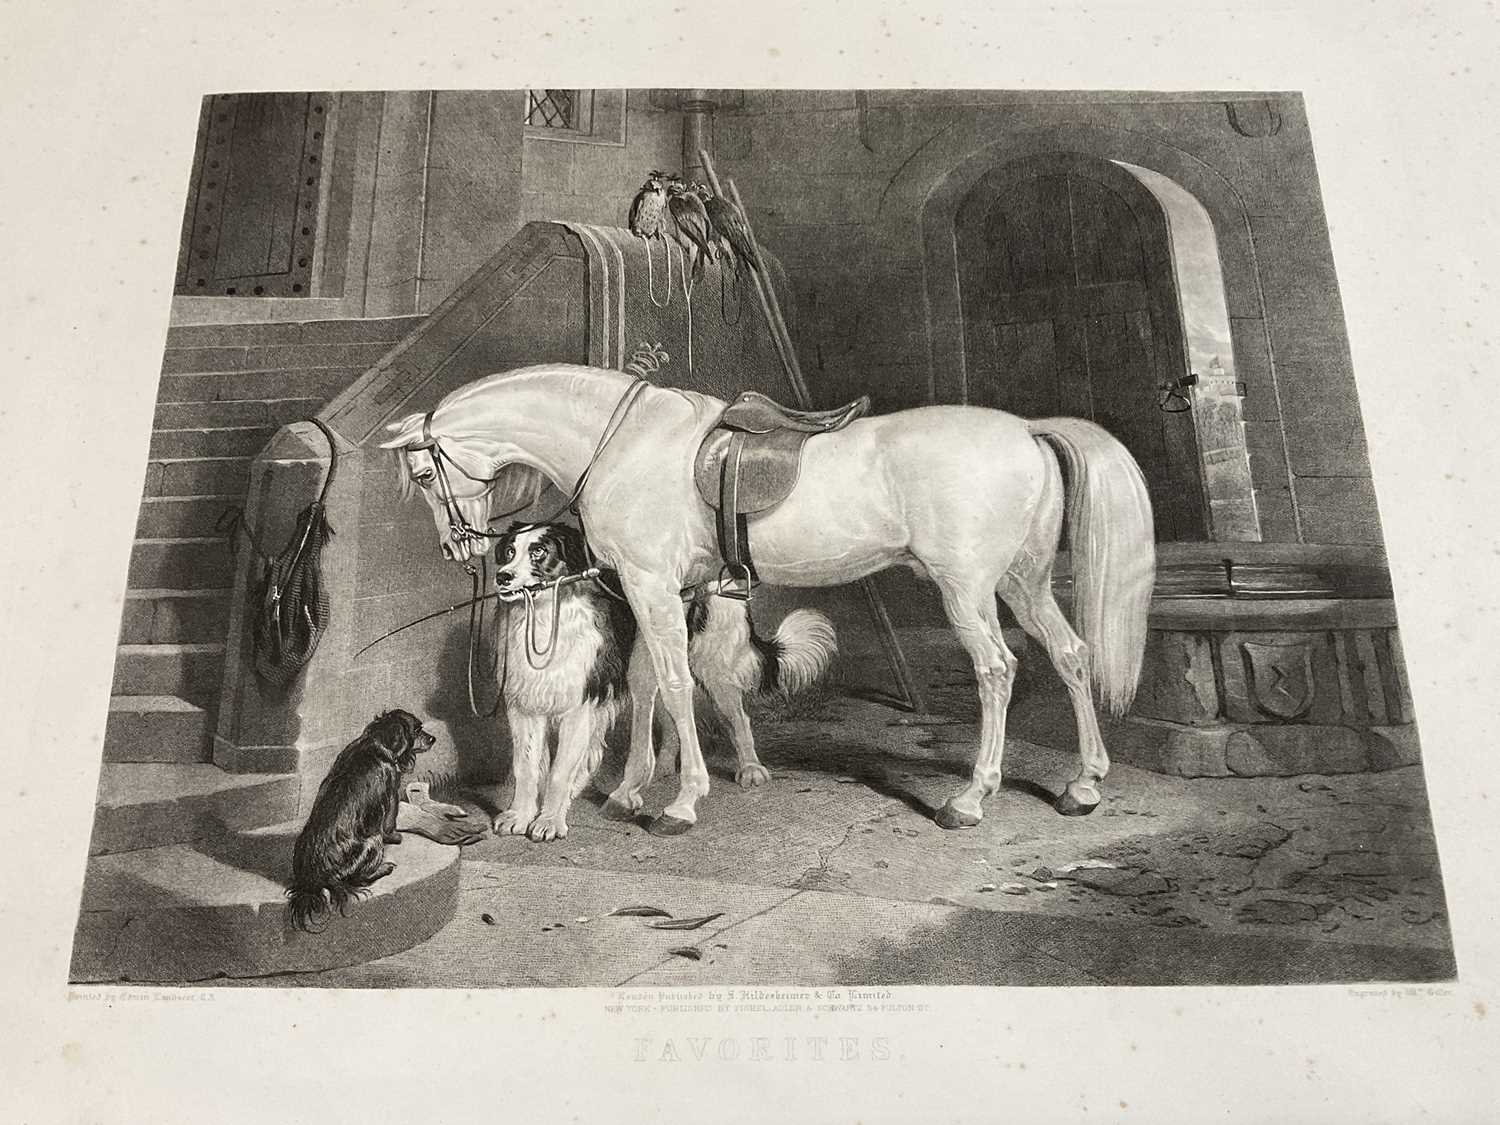 19th century engraving by William Giller after Sir Edwin Landseer - Favorites, published by Hildeshe - Image 2 of 7